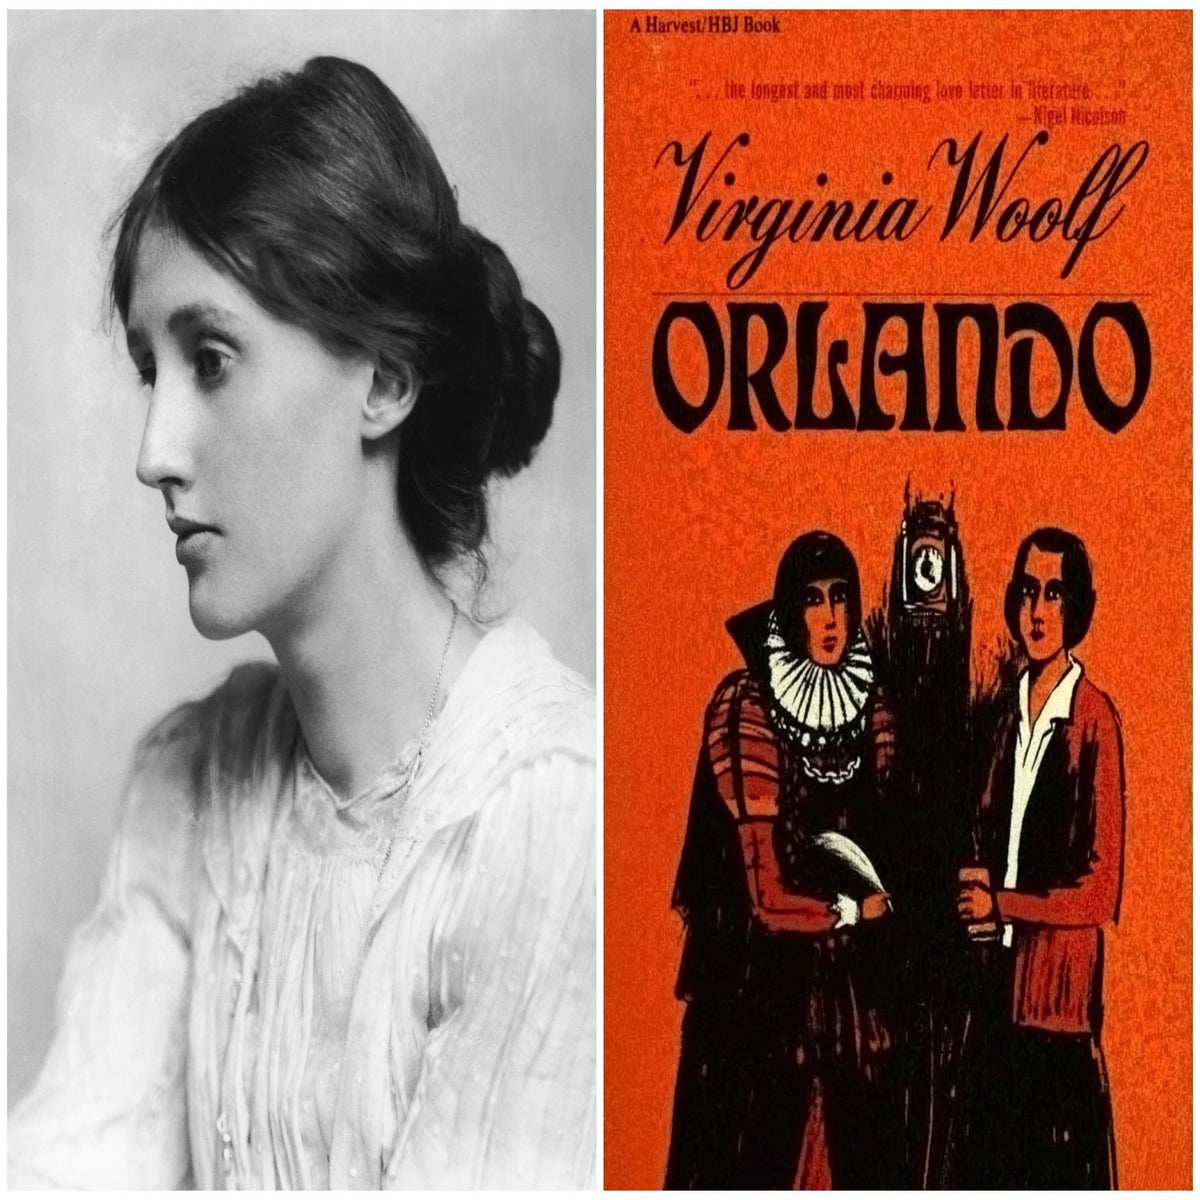 Virginia Woolf's queer romance inspired one of history's most radical books